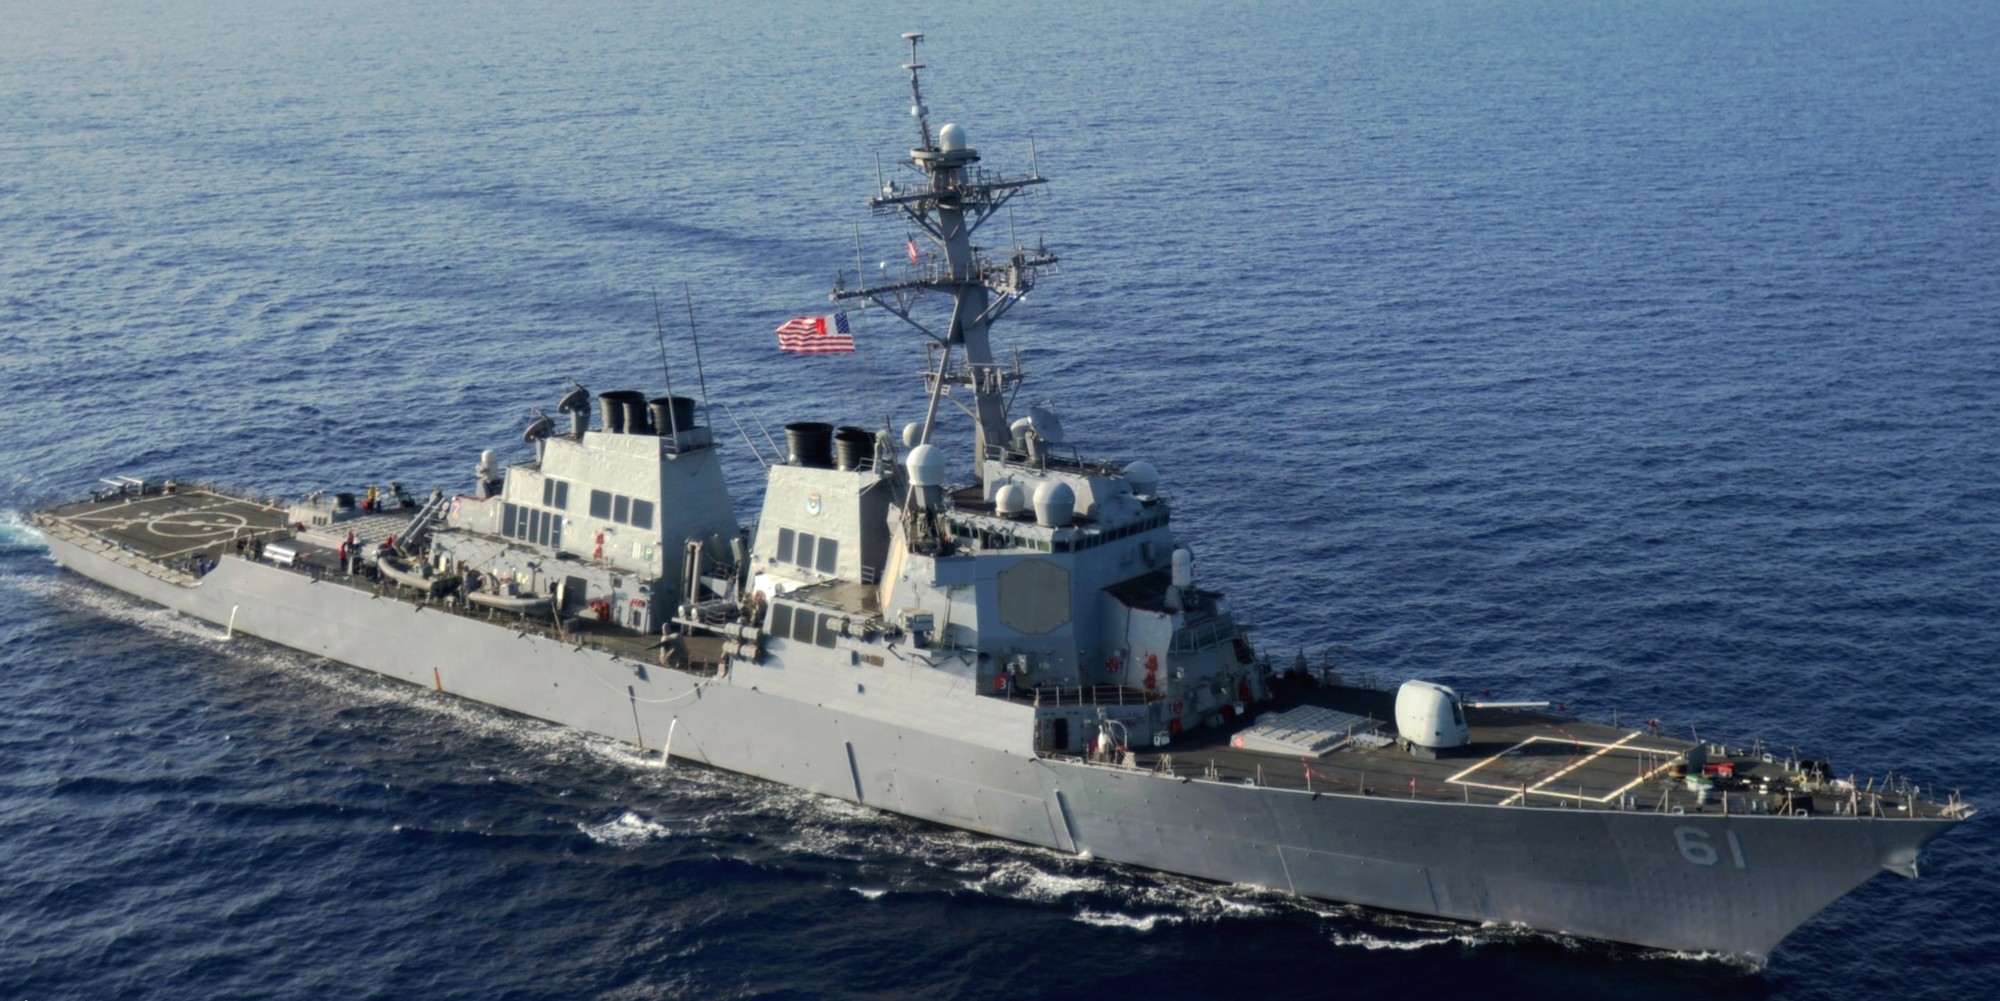 ddg-61 uss ramage guided missile destroyer arleigh burke class aegis us navy 17